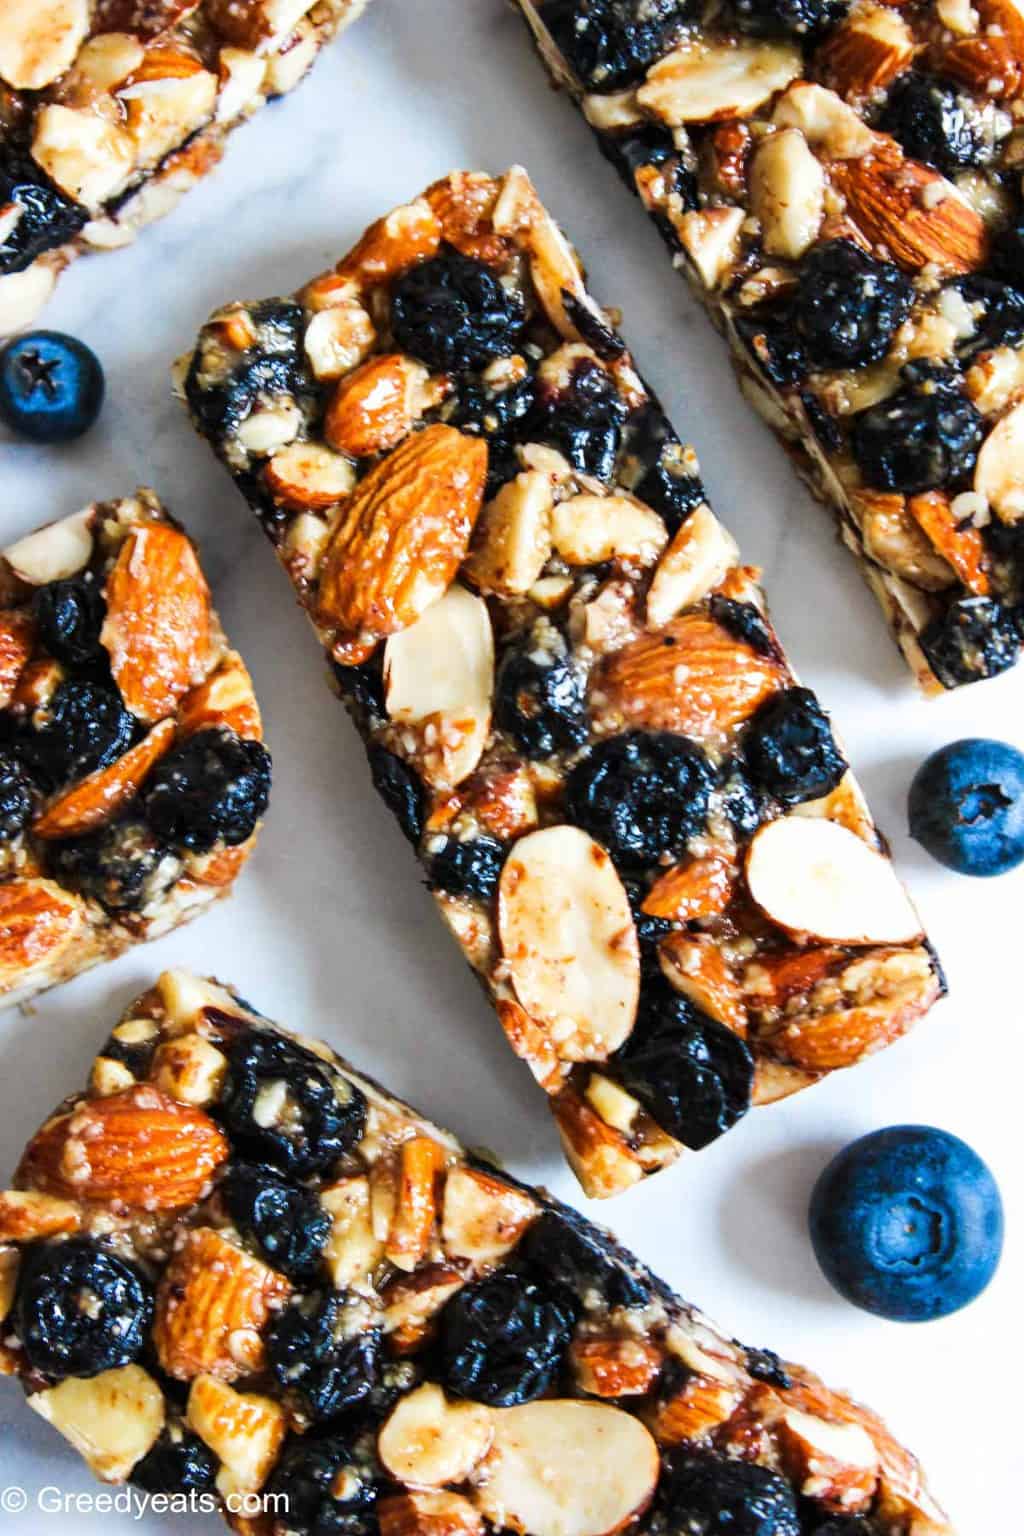 If you are looking for Flavorsome and Breakfast Bars, my Almond Bars recipe got you covered.